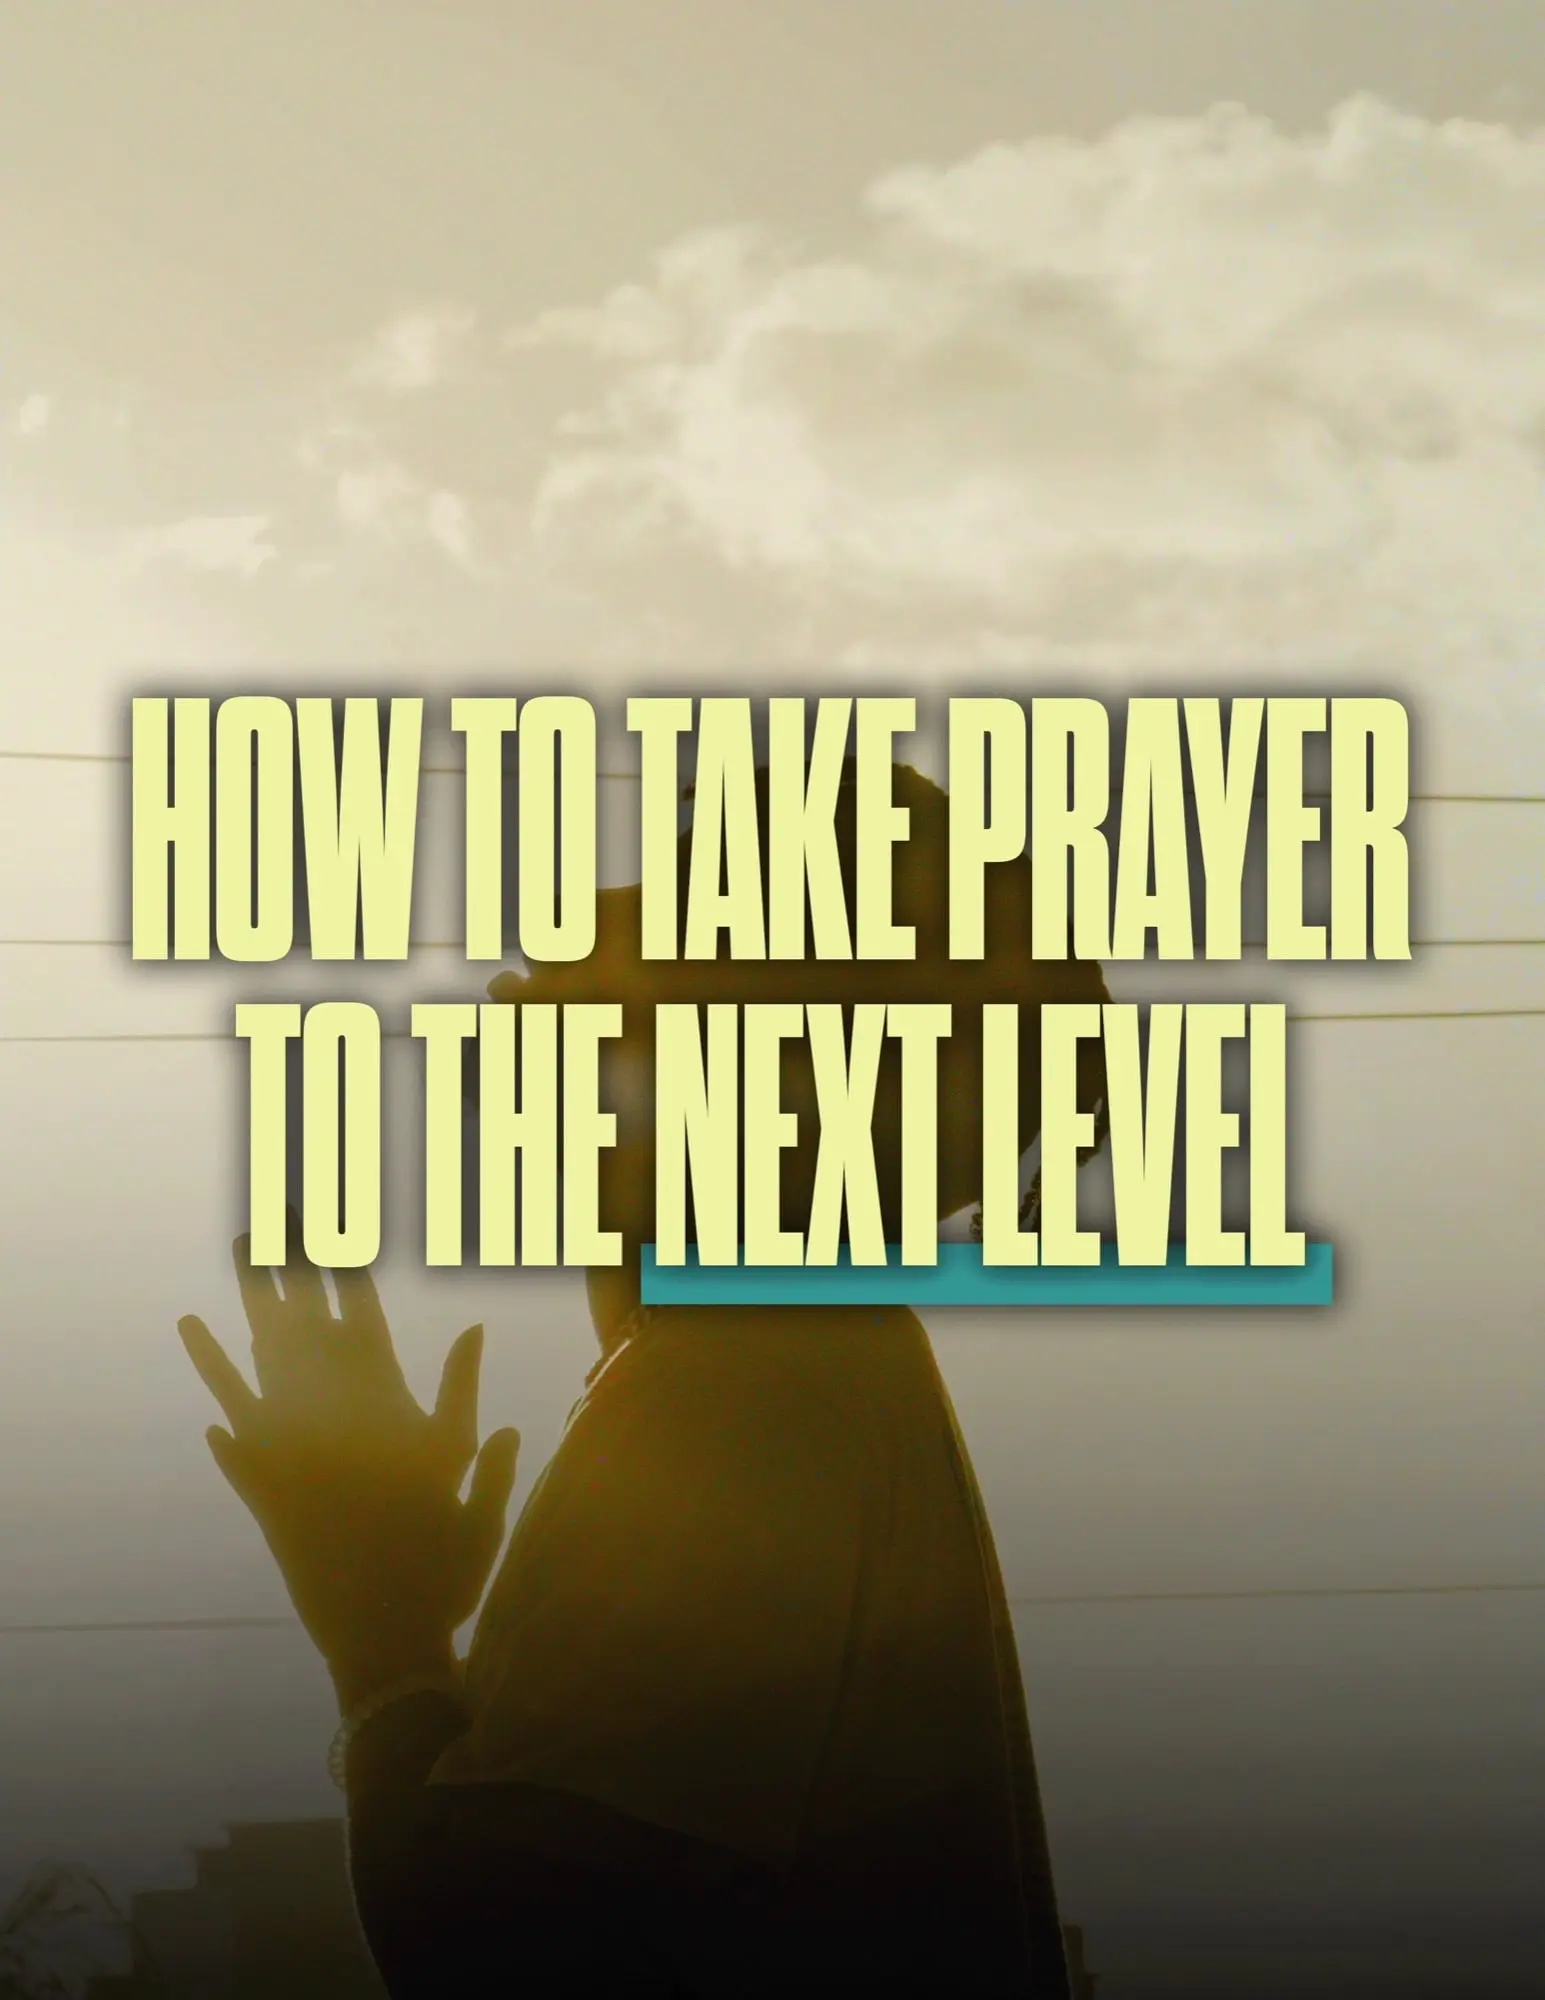 Featured Image for “How to Take Your Prayer to the Next Level”